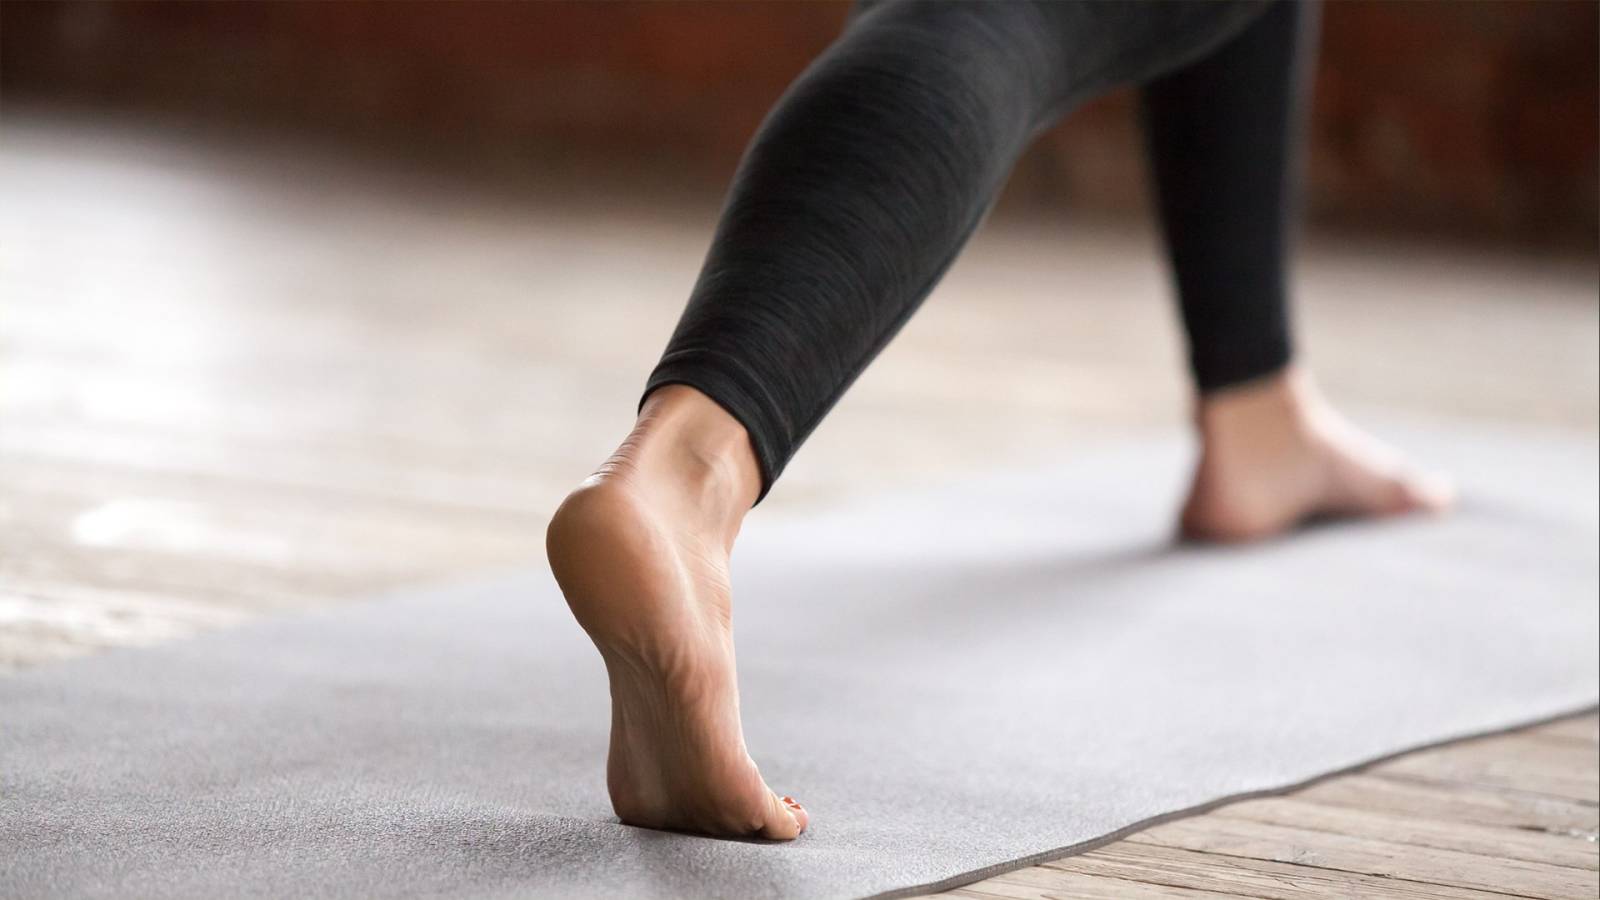 No, We're Not Asking Too Much: On Making Yoga More Inclusive